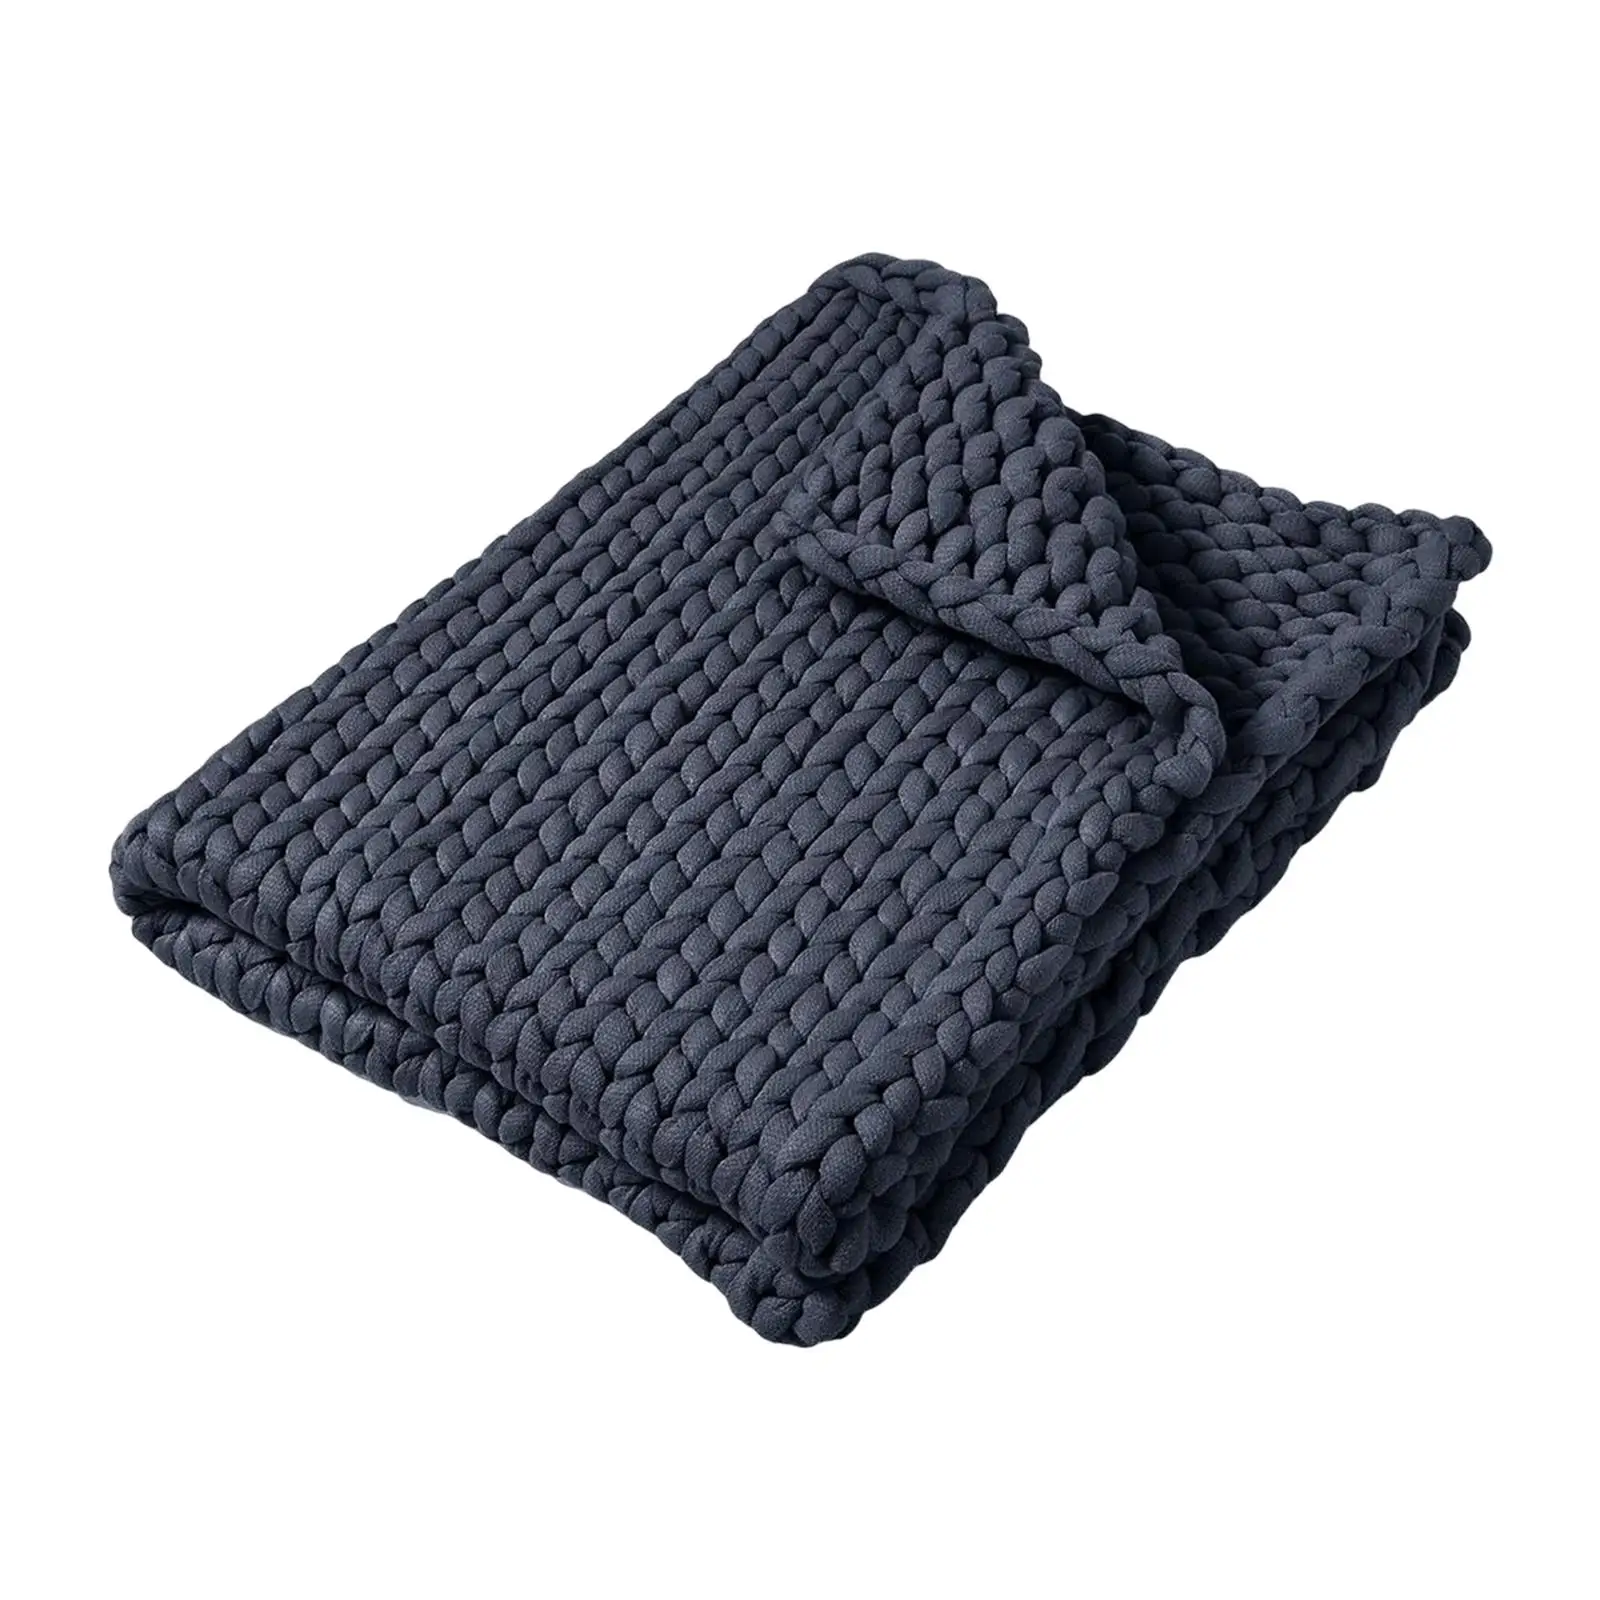 Chunky Knit Blanket Thick Blanket Comfortable for Sofa Living Room Decor